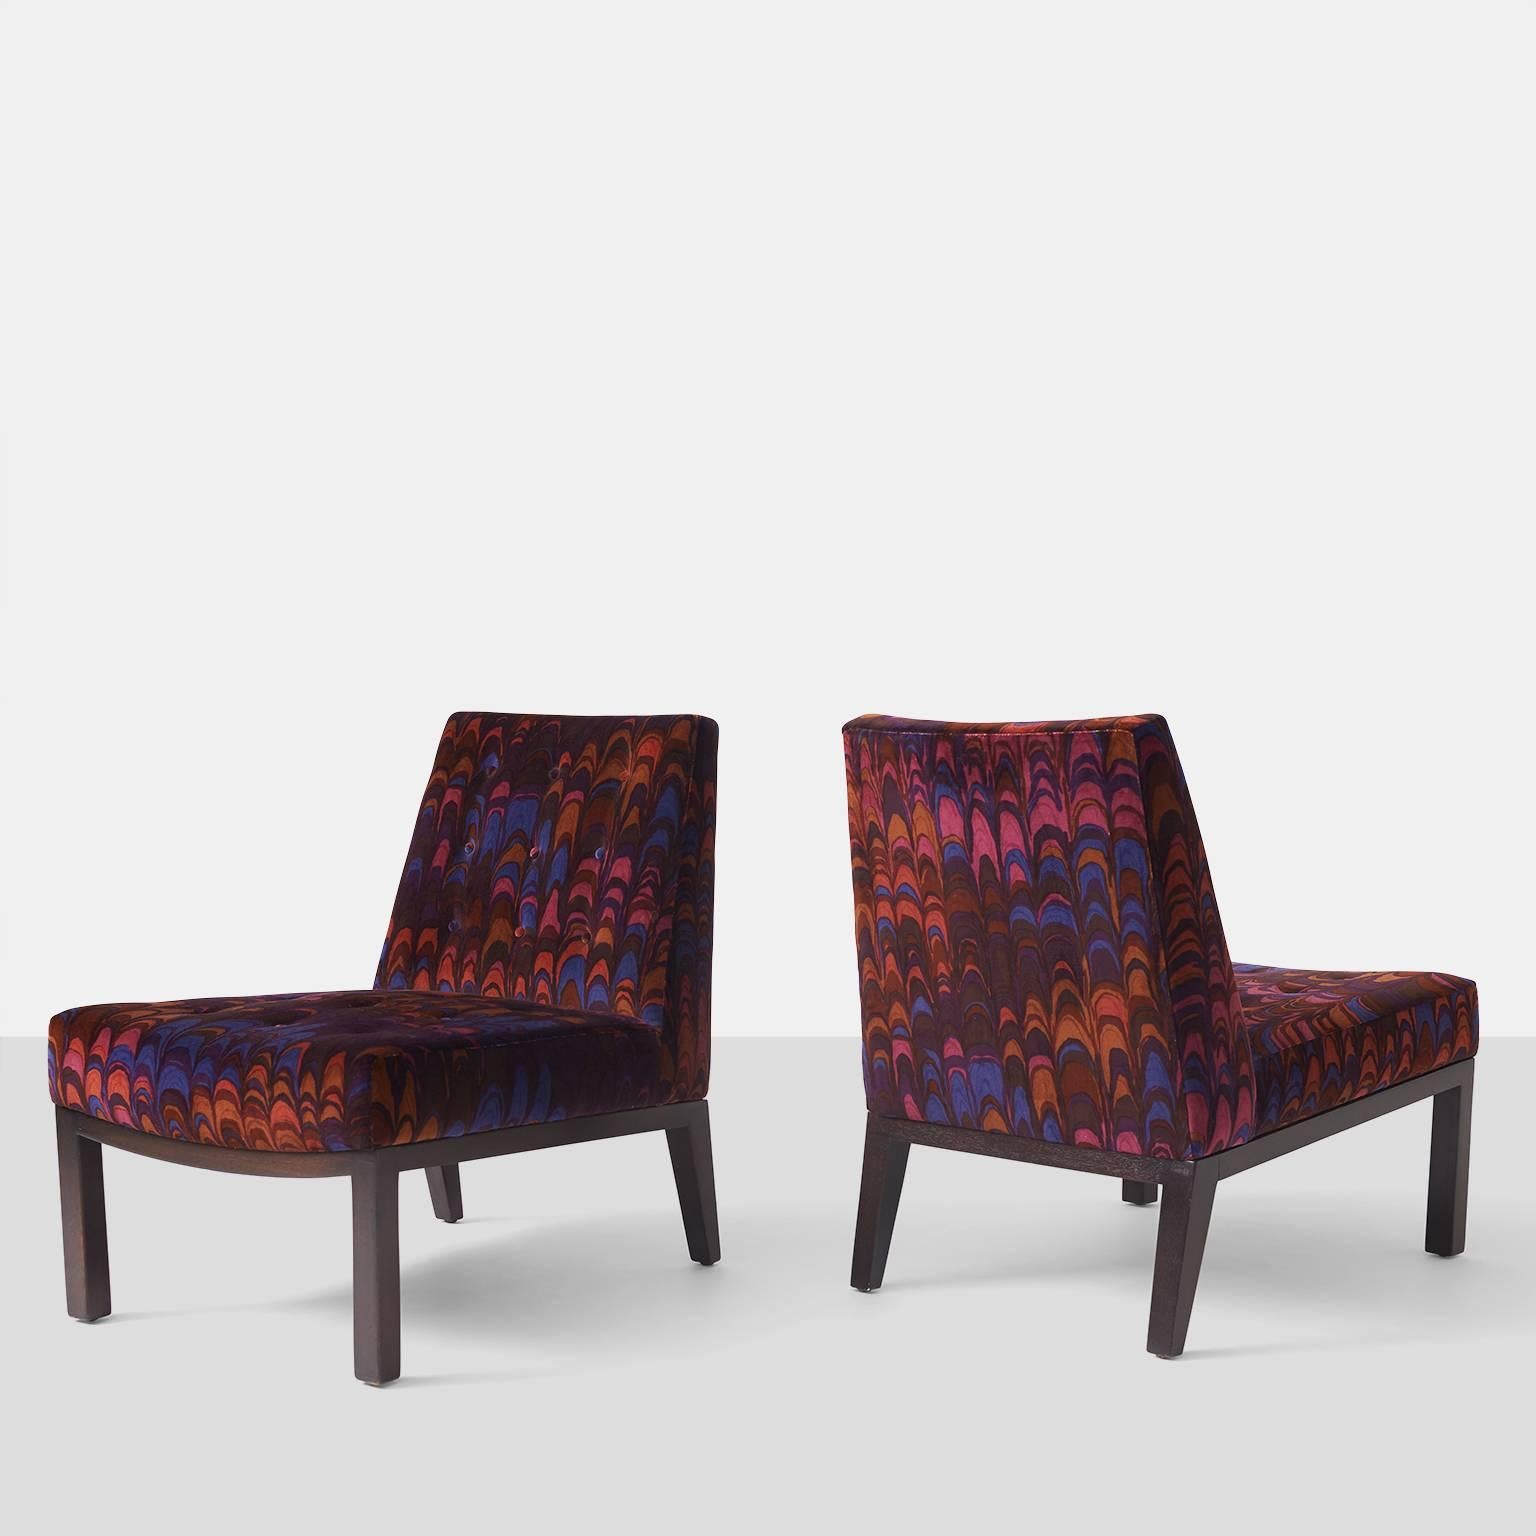 A pair of slipper chairs with tufted seat and back by Edward Wormley for Dunbar. Chairs have been upholstered in a Jack Lenor Larsen velvet and frames are mahogany.